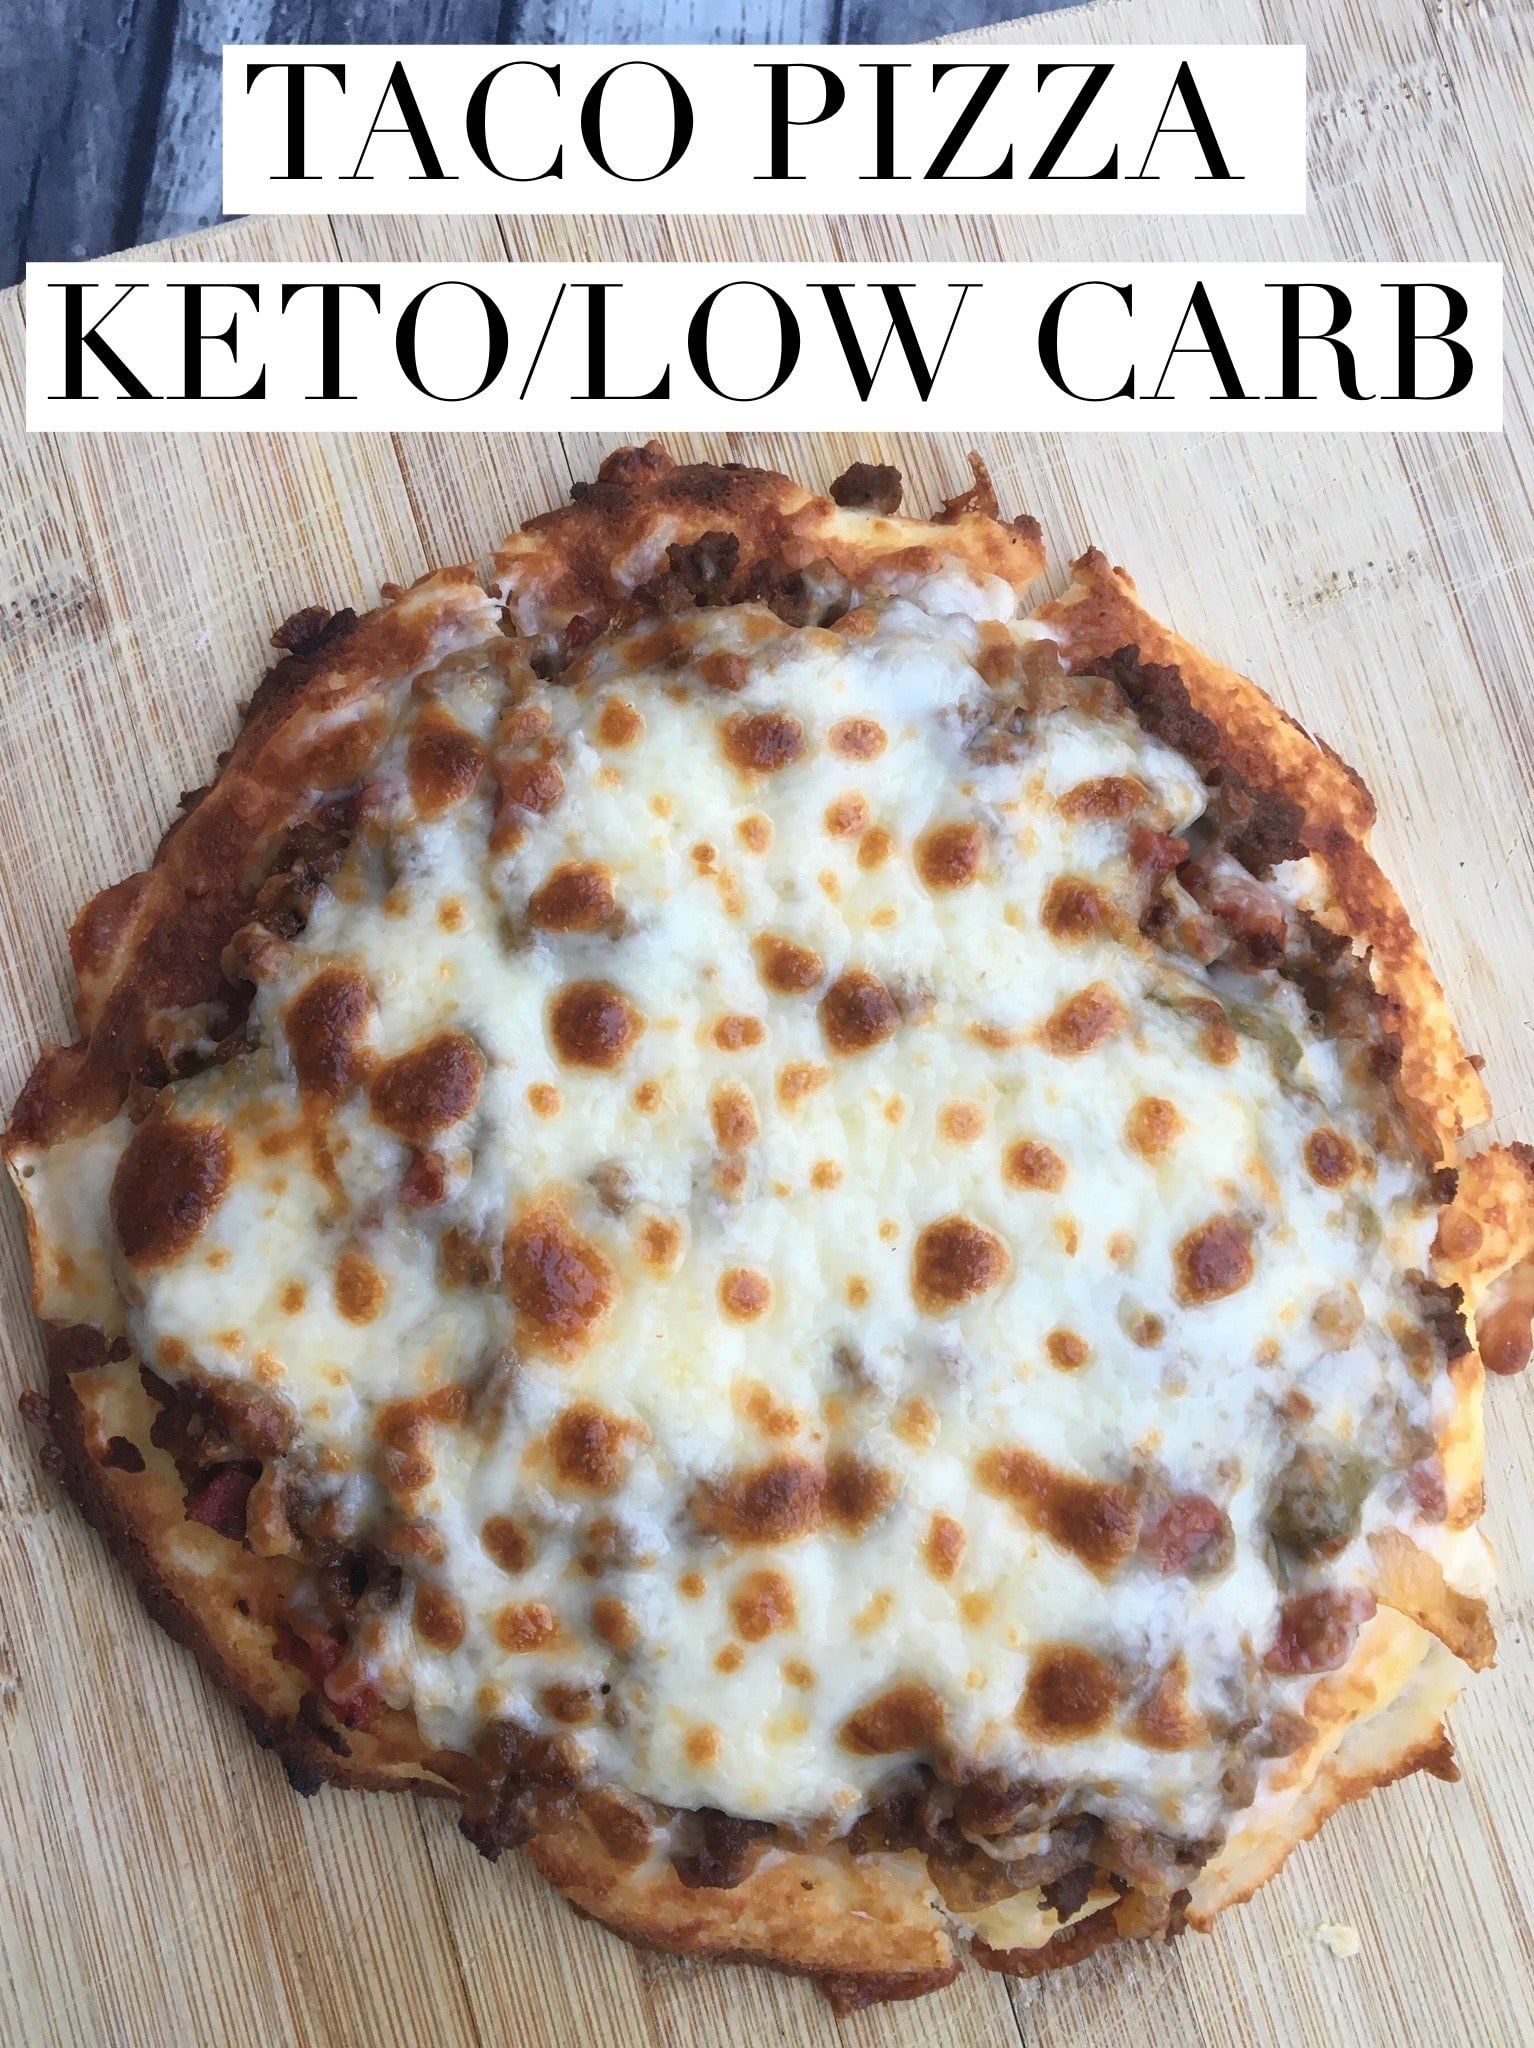 This Taco Keto Pizza Recipe makes two of your favorites keto friendly and delicious! Serve this up to your family tonight as an easy keto friendly meal. 